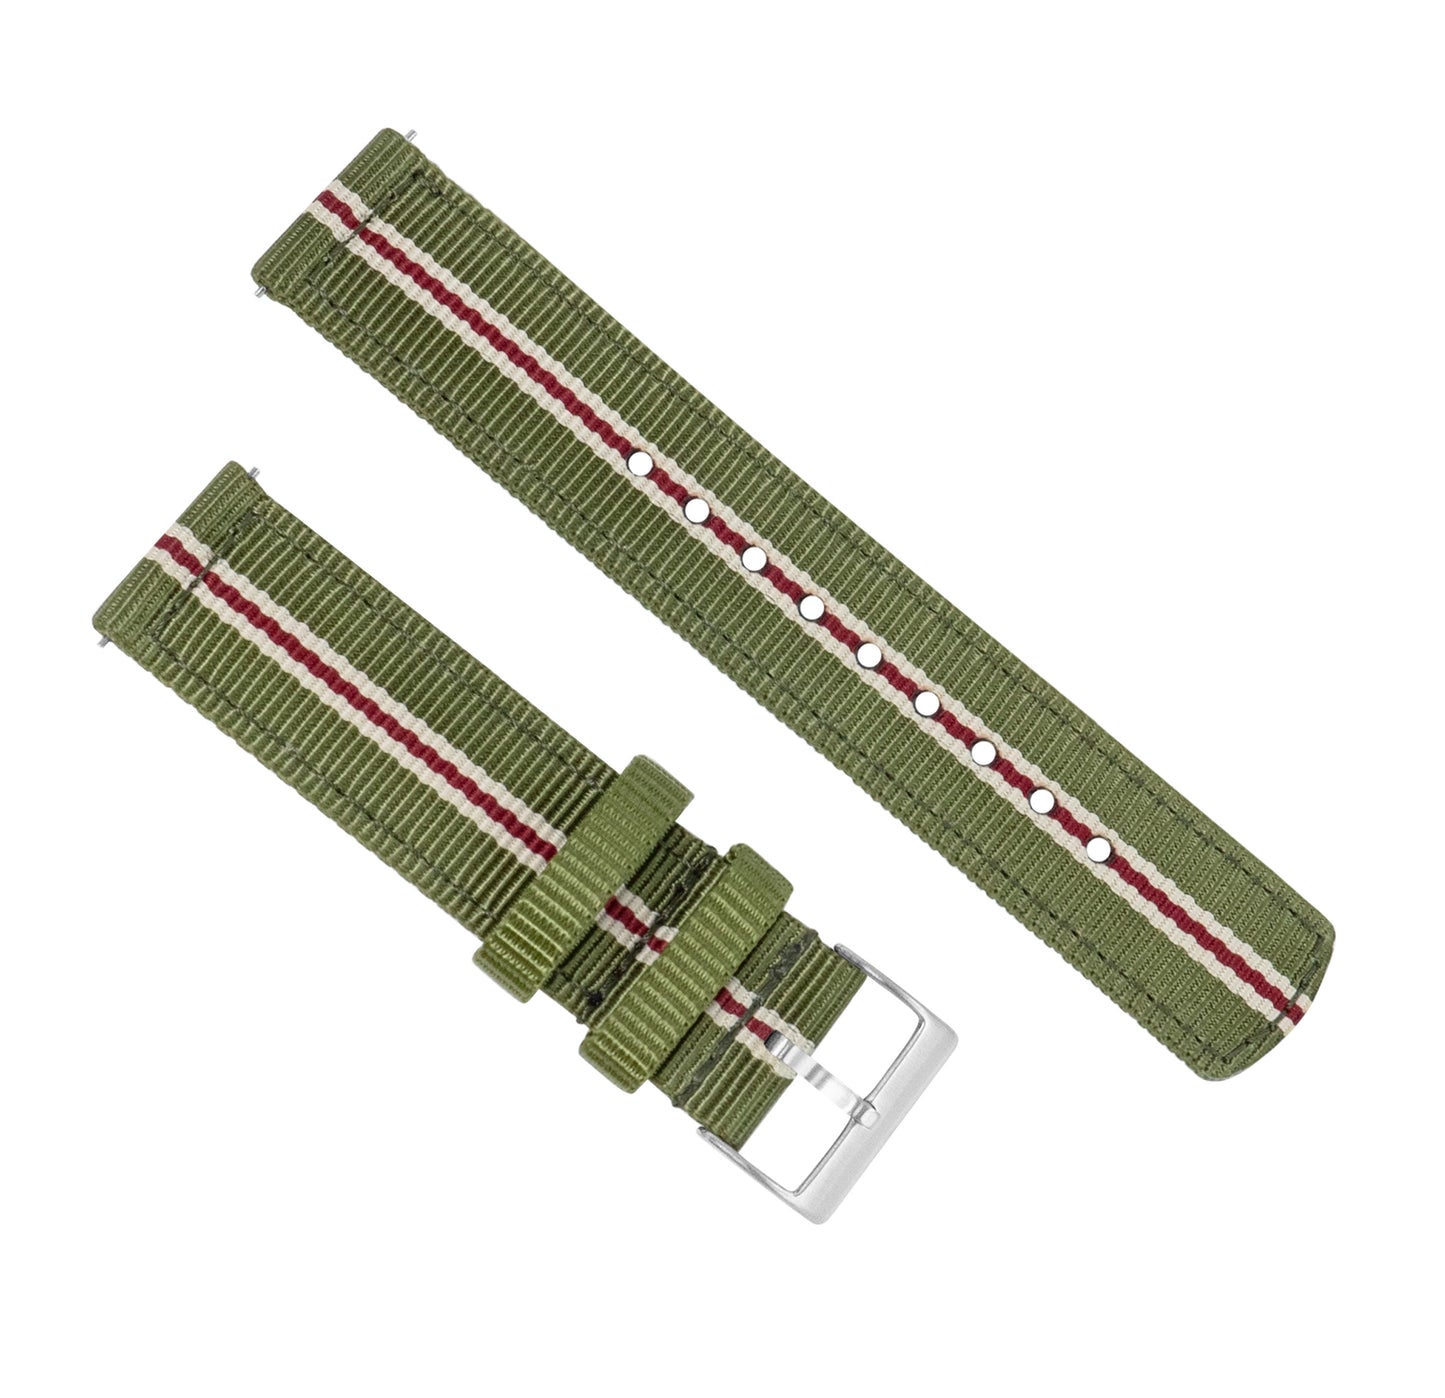 Fossil Gen 5 | Two-Piece NATO Style | Army Green & Crimson - Barton Watch Bands